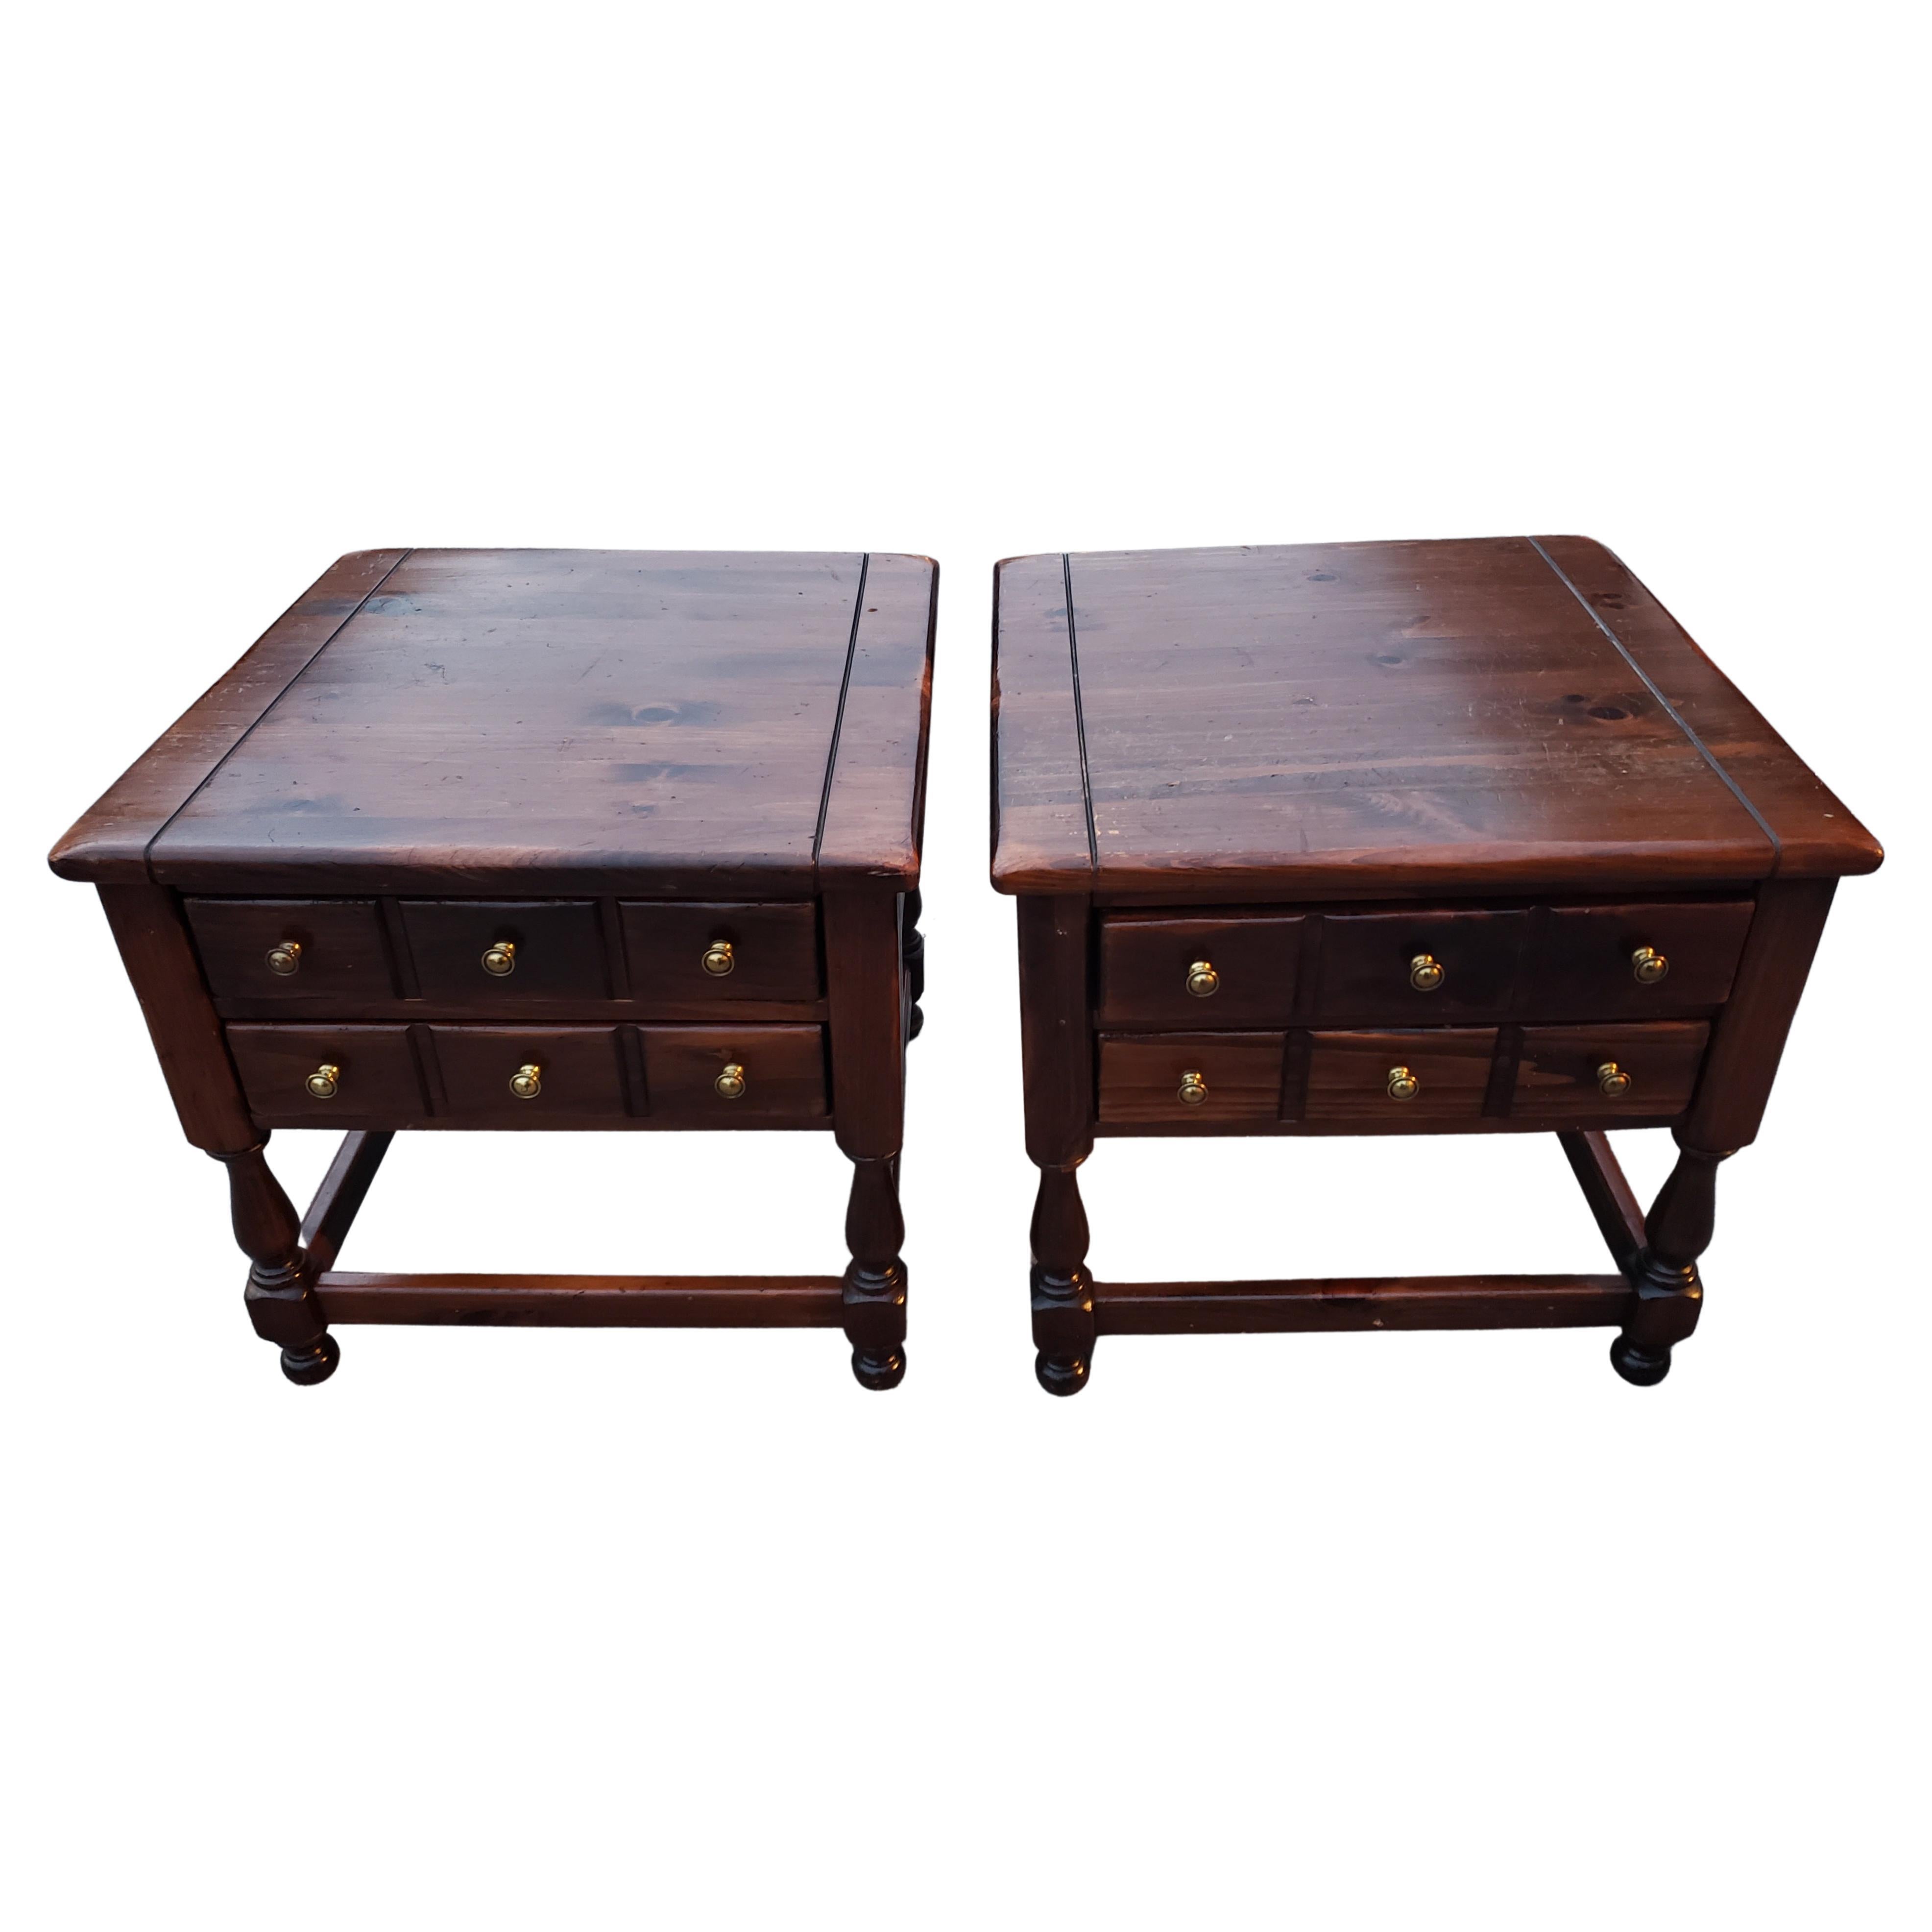 Rare pair of Ethan Allen Antique Pine Old Tavern Collection side tables. Two functional dovetailed drawers. Nice dark old pine patina. Good vintage condition. Wear appropriate with age and normal use. Measurements are 25